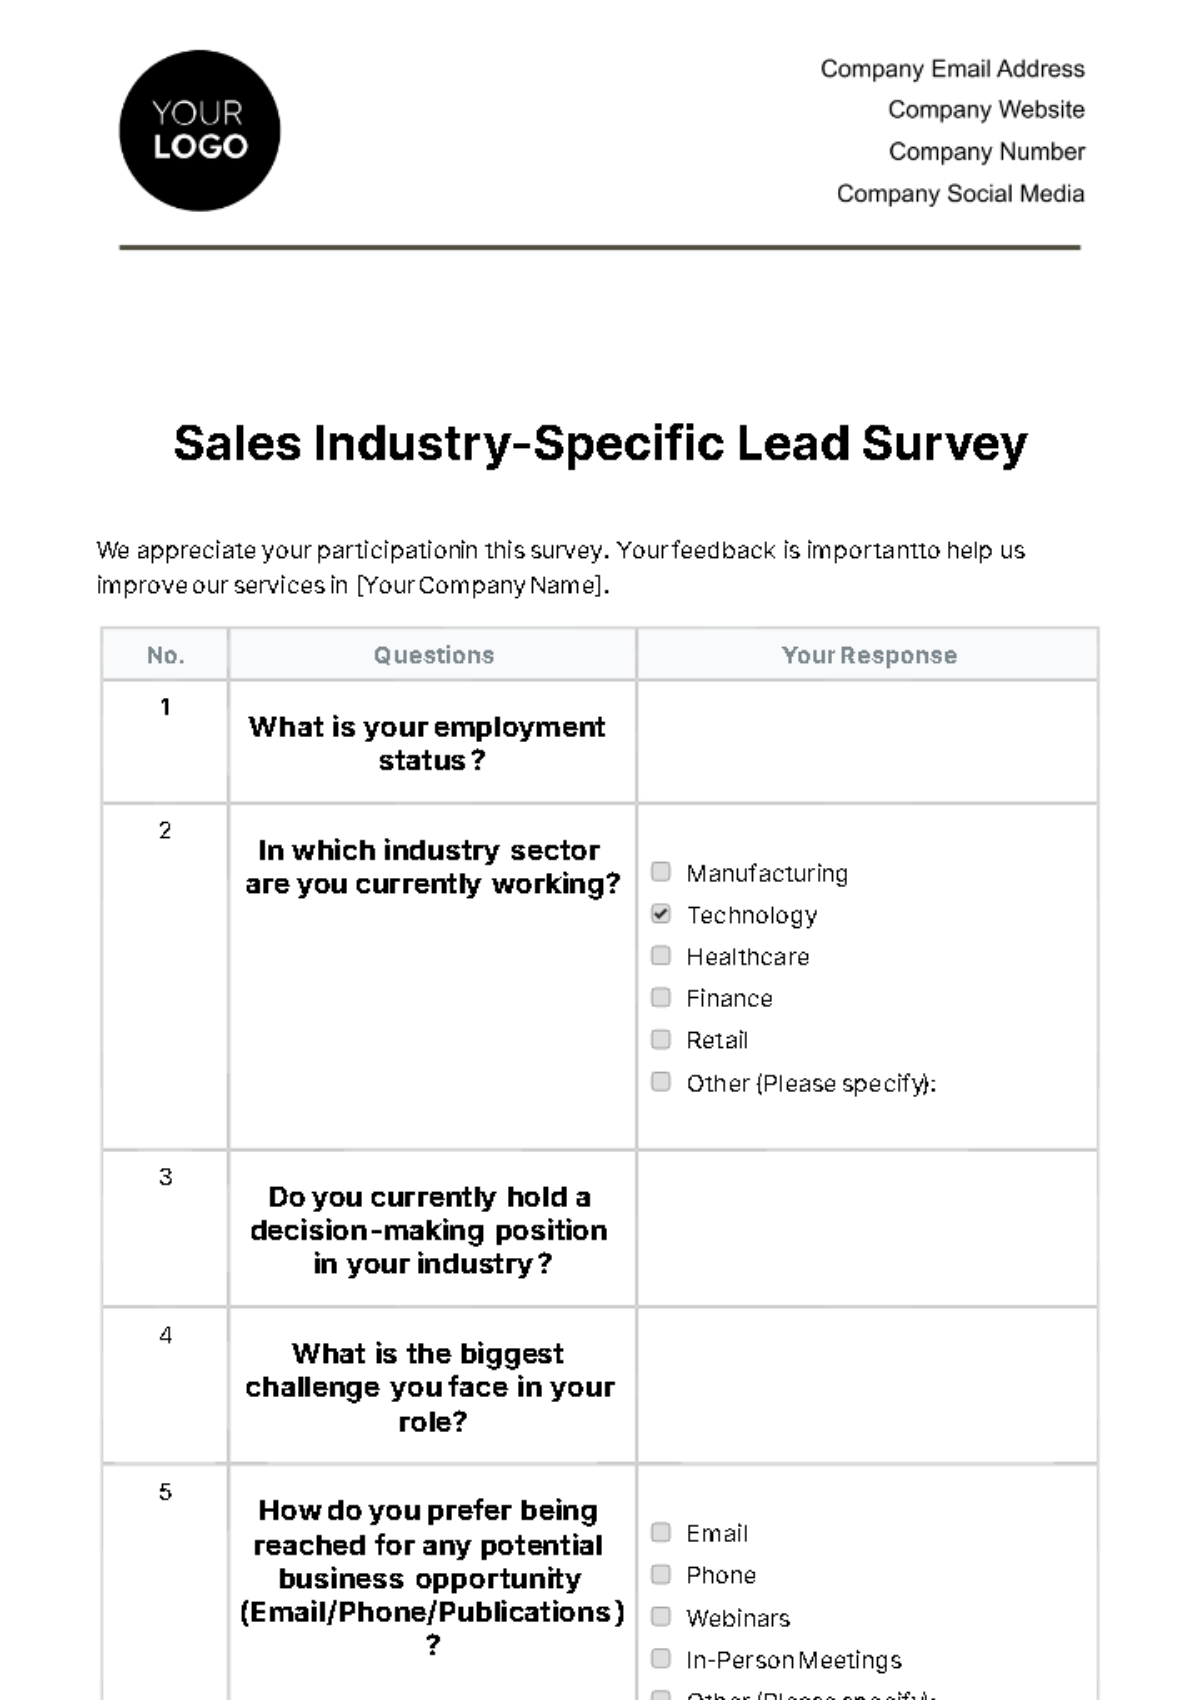 Sales Industry-Specific Lead Survey Template